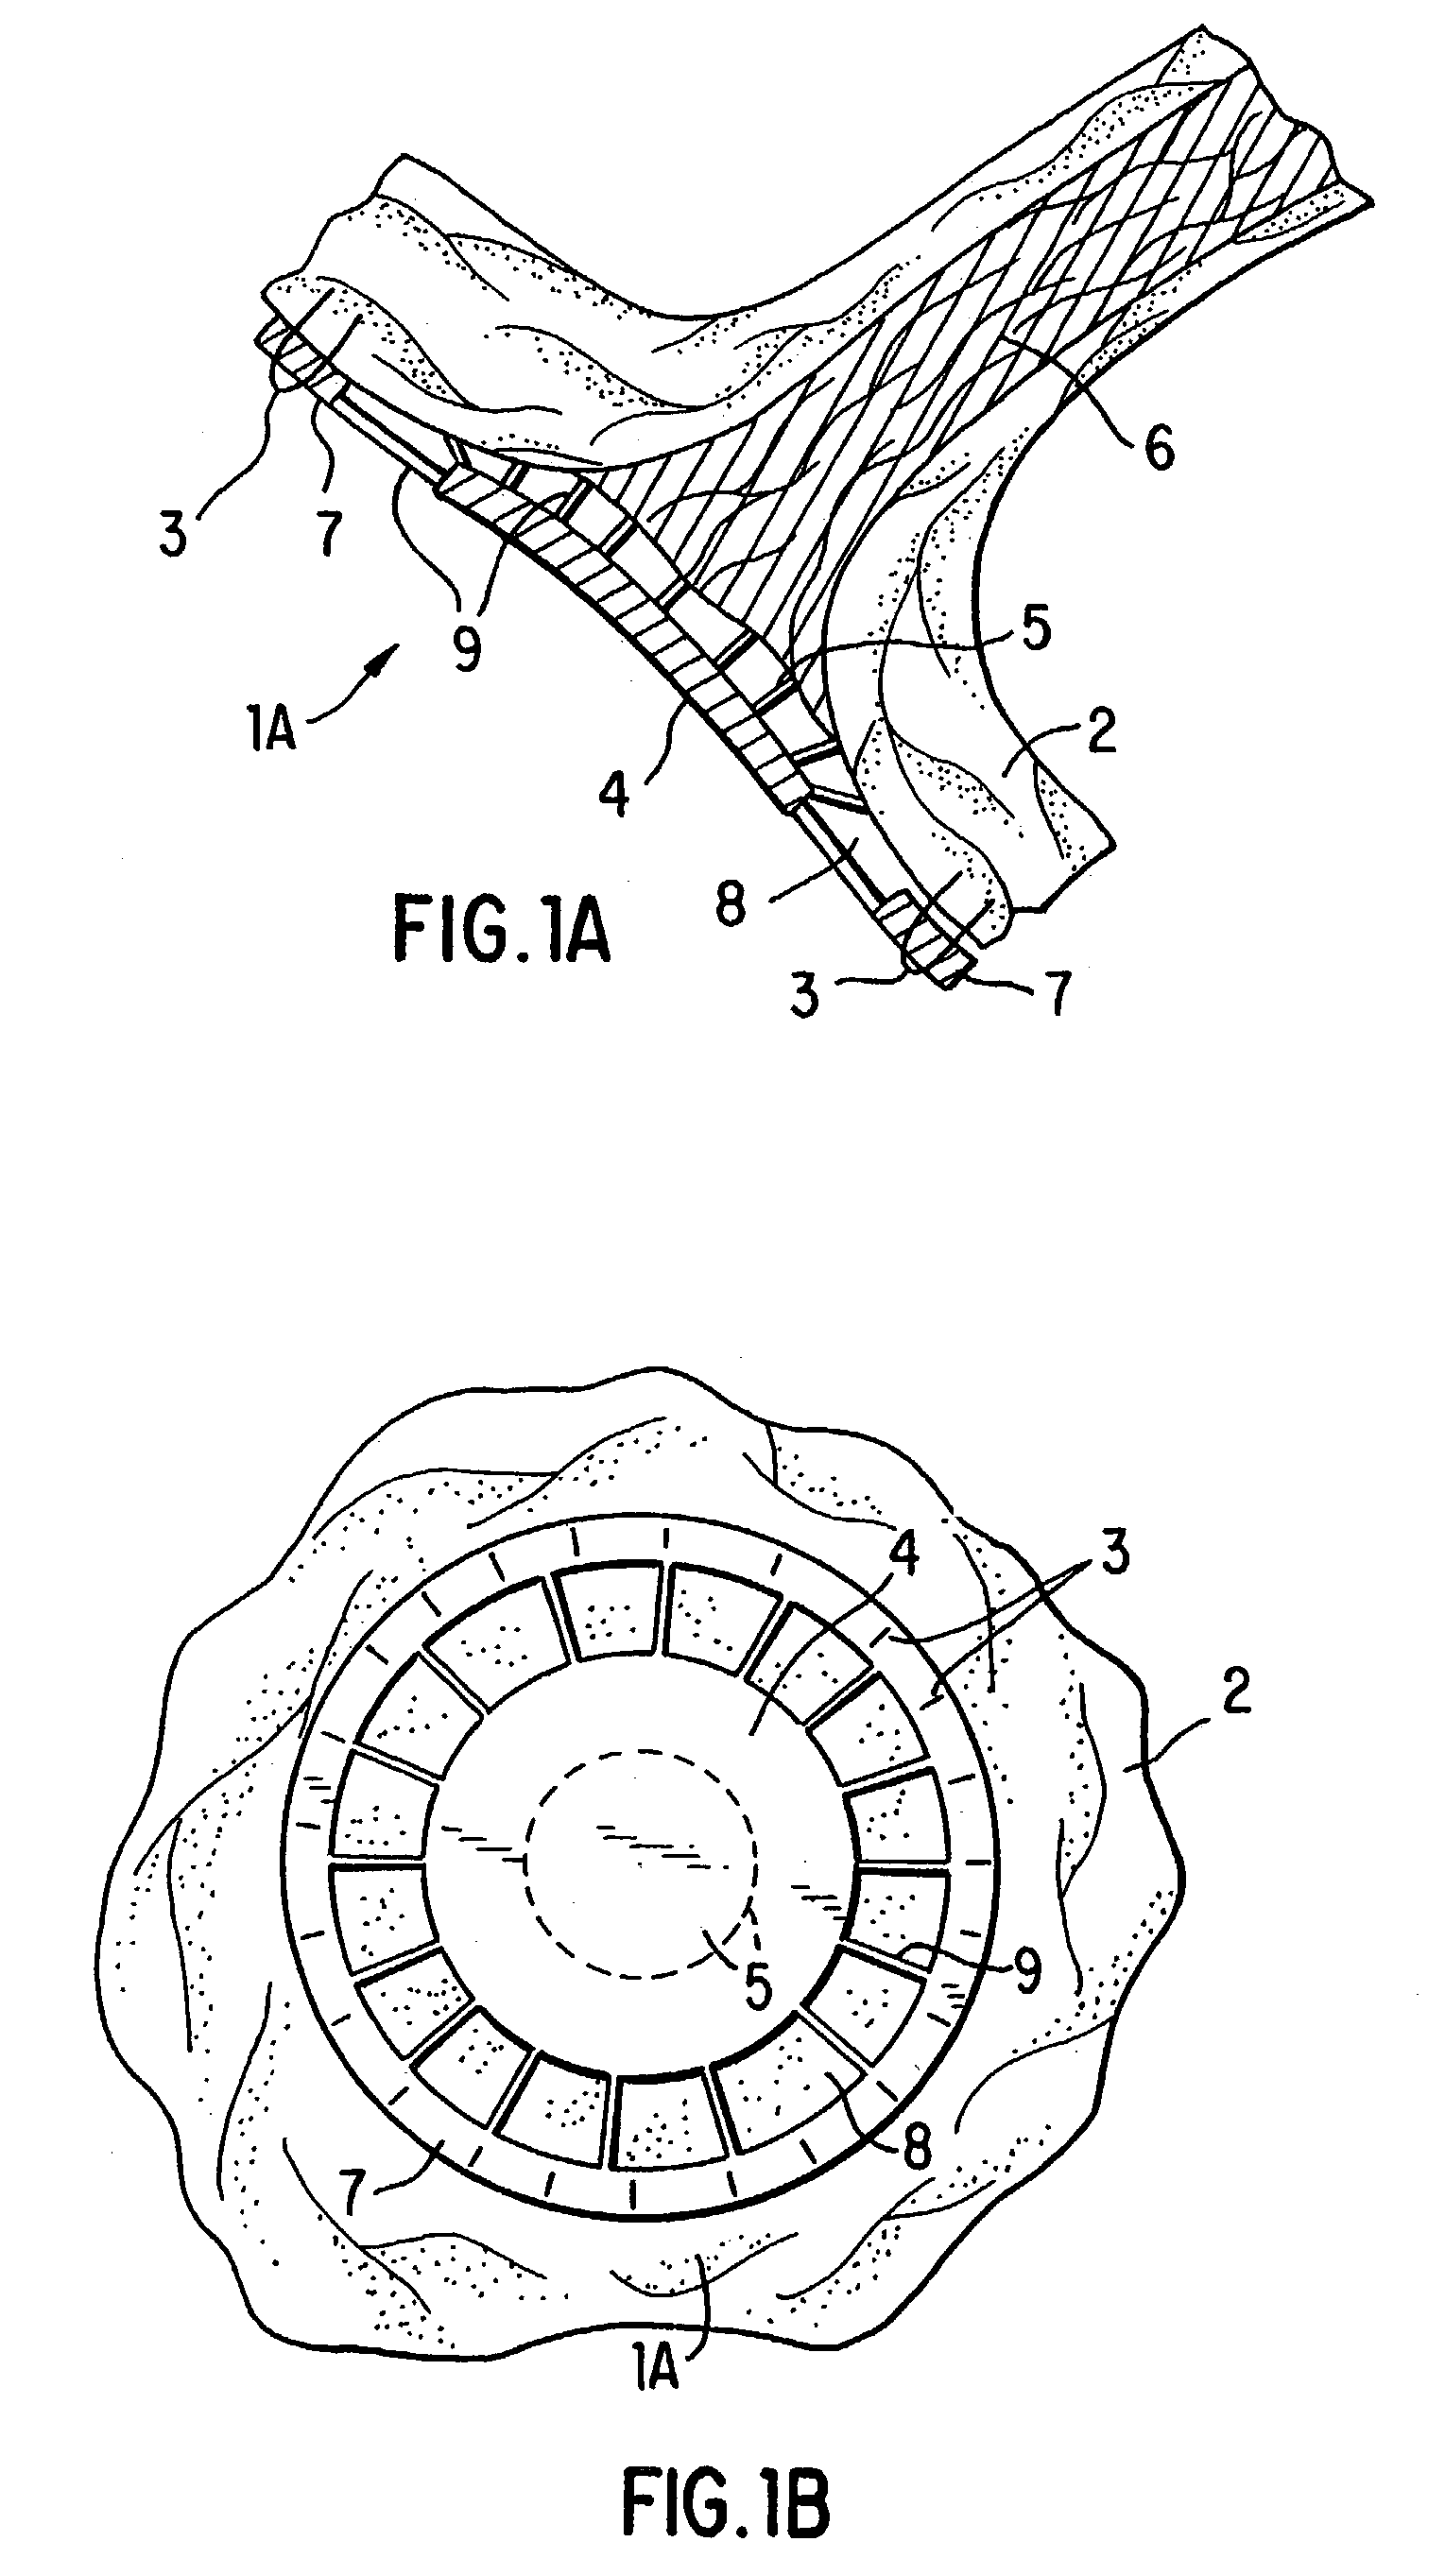 Method and devices for decreasing elevated pulmonary venous pressure